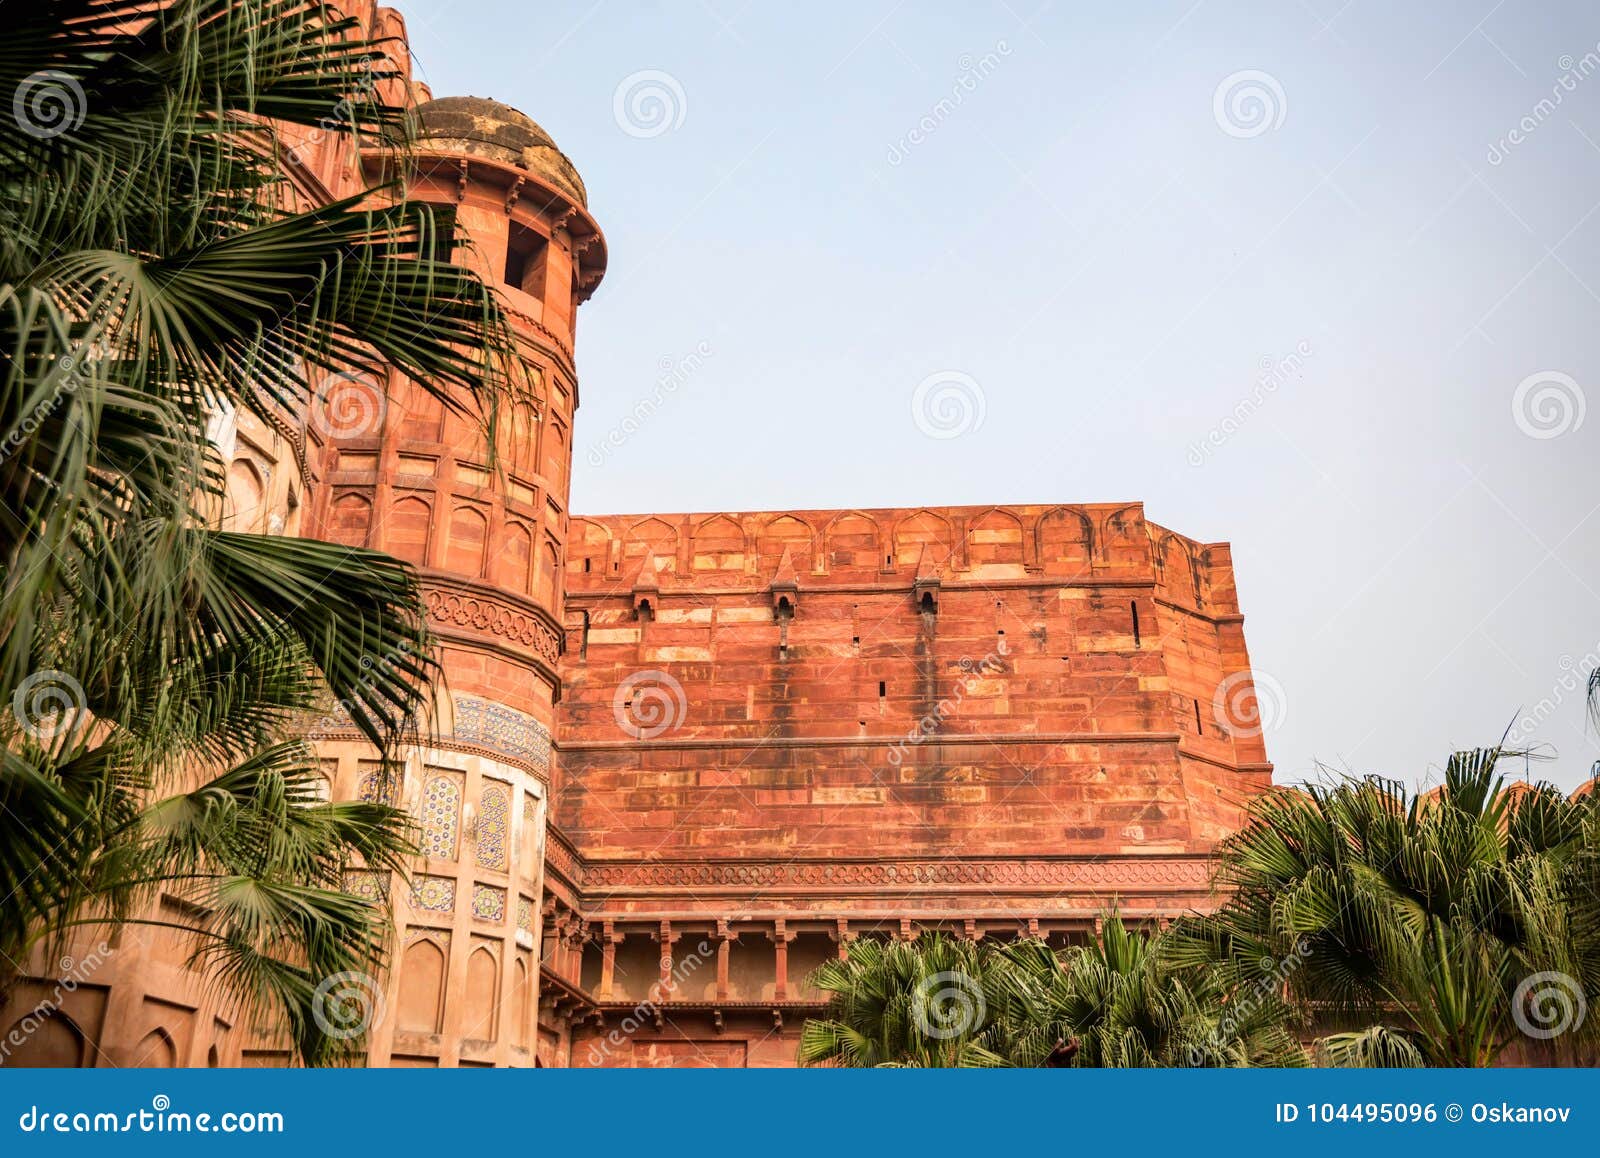 Red Fort Situated In Agra India Stock Photo Image Of Islam